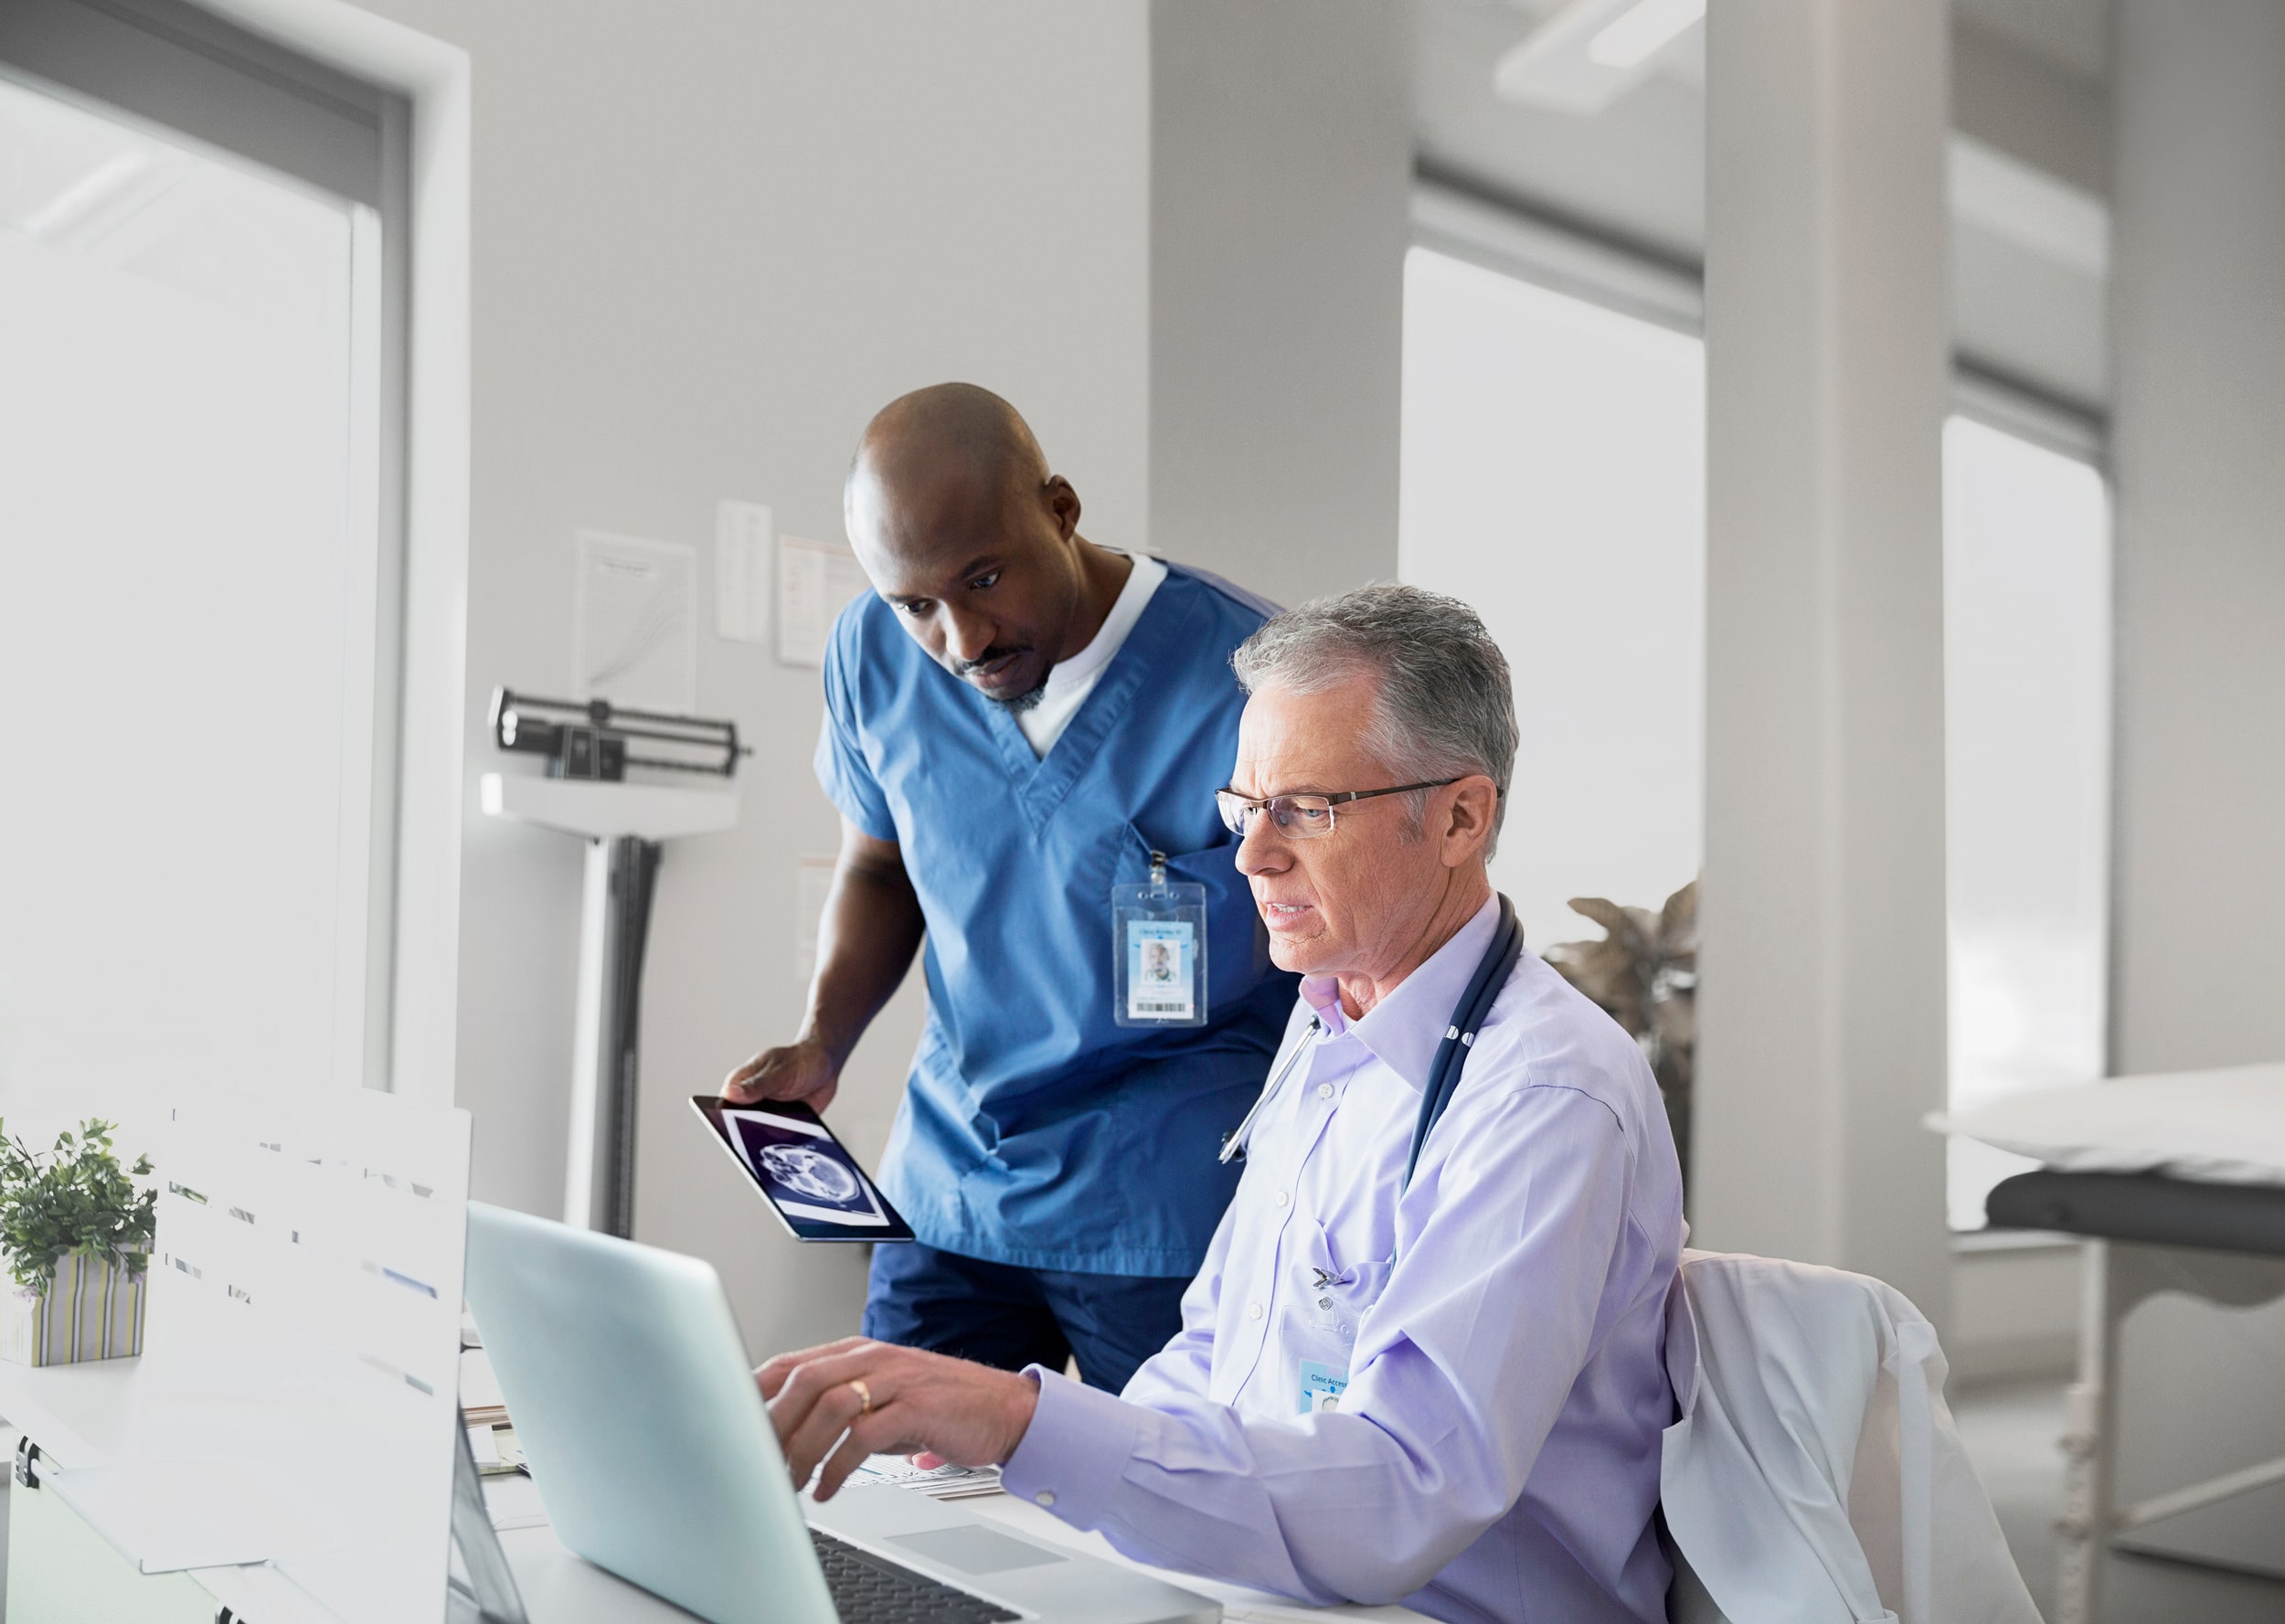 Two people looking at a screen in a professional medical environment